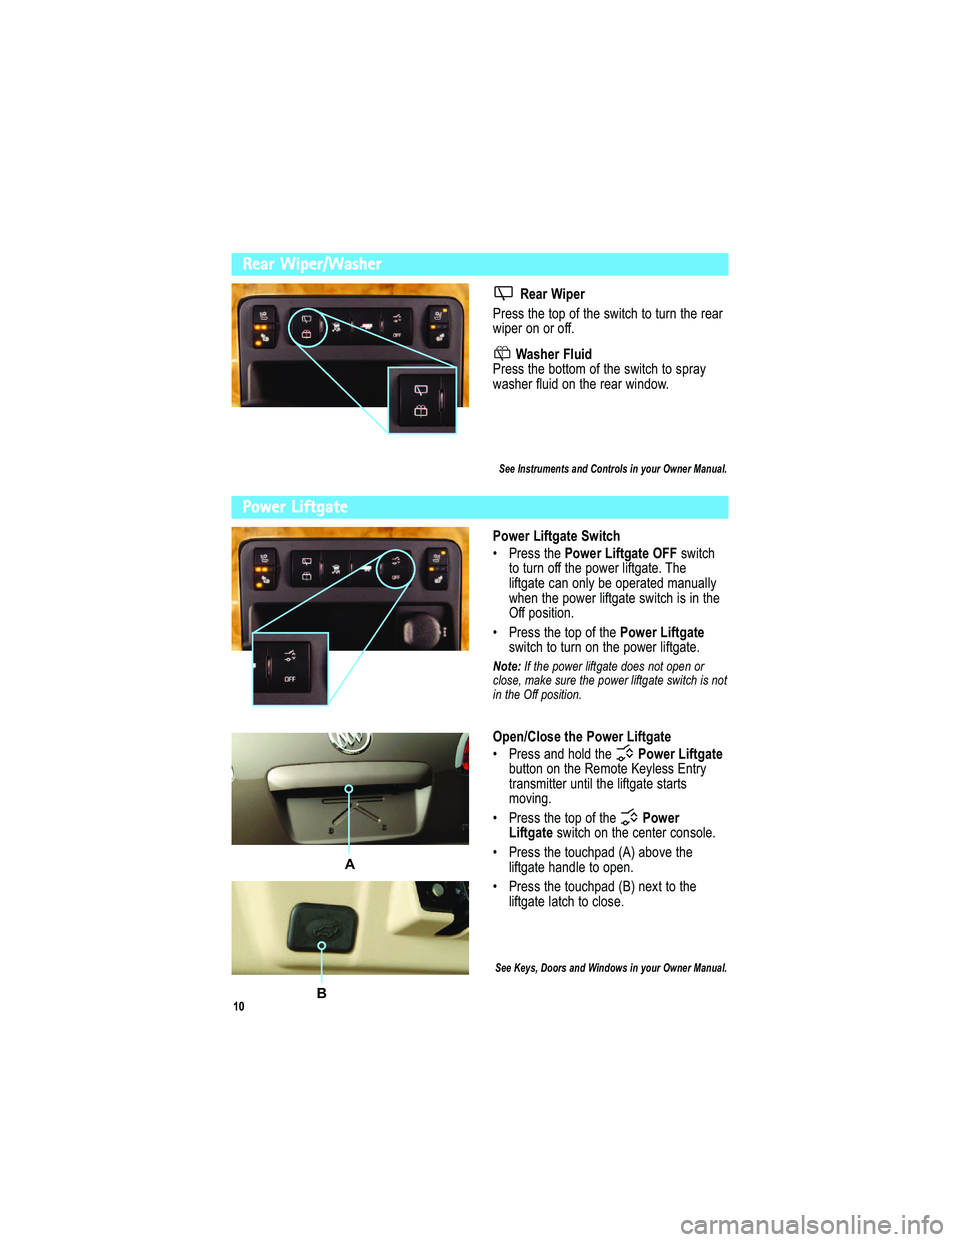 BUICK ENCLAVE 2010  Get To Know Guide 
Rear Wiper/Washer
 *&6!$ .5 *6
" </ == >2 / >9 : 9 0  >2 /  = A 3> - 2  >9  >? <8  >2 / < / + <
A 3: /< 9 8 9 < 9 00 
$ &7- *6! 19 .) !
" </ == >2 / , 9>>9 7  9 0  >2 / = A 3> - 2  >9  = : <+ C
